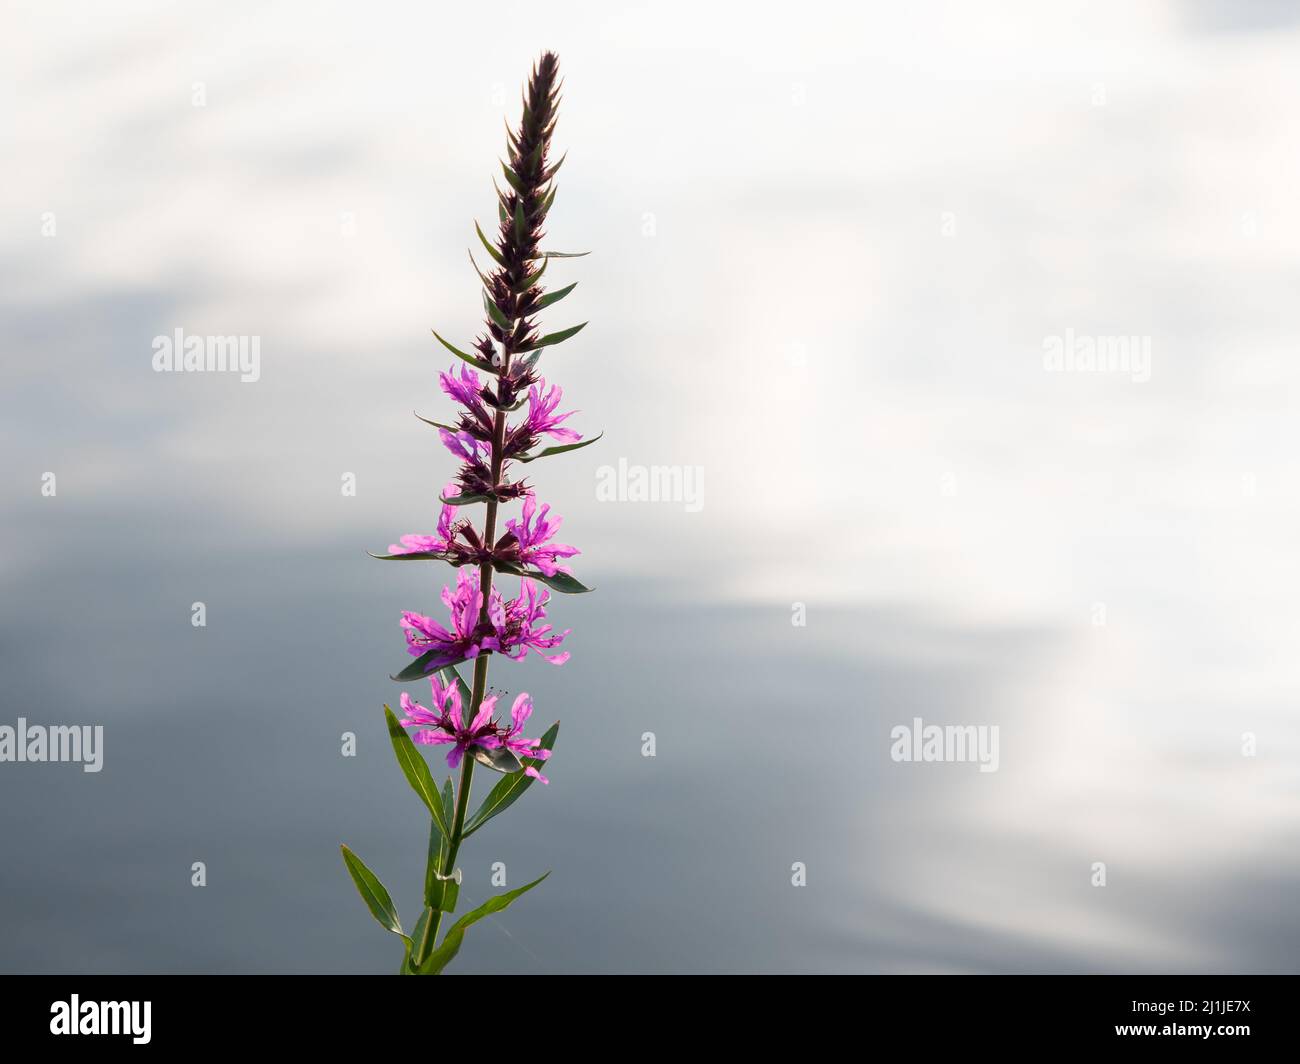 Close-up photo of purple loosestrife (Lythrum salicaria) flowers with calm lake water in the background Stock Photo